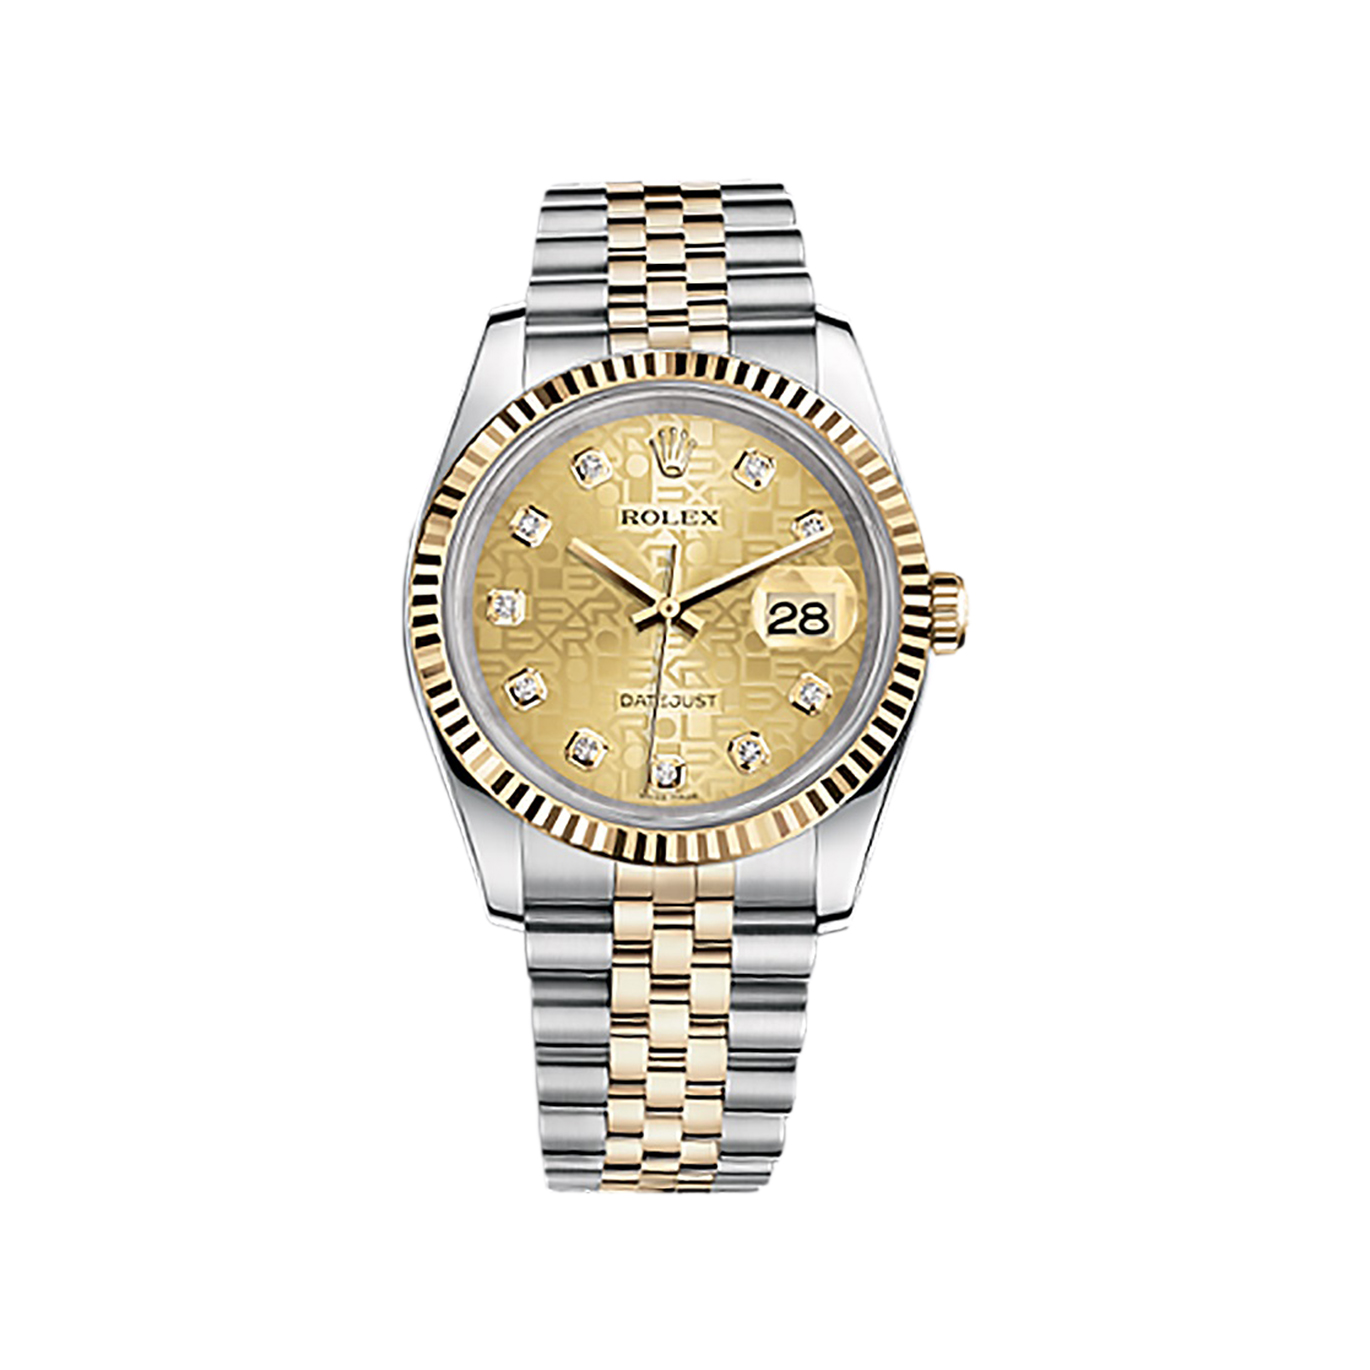 Datejust 36 116233 Gold & Stainless Steel Watch (Champagne Jubilee Design Set with Diamonds) - Click Image to Close